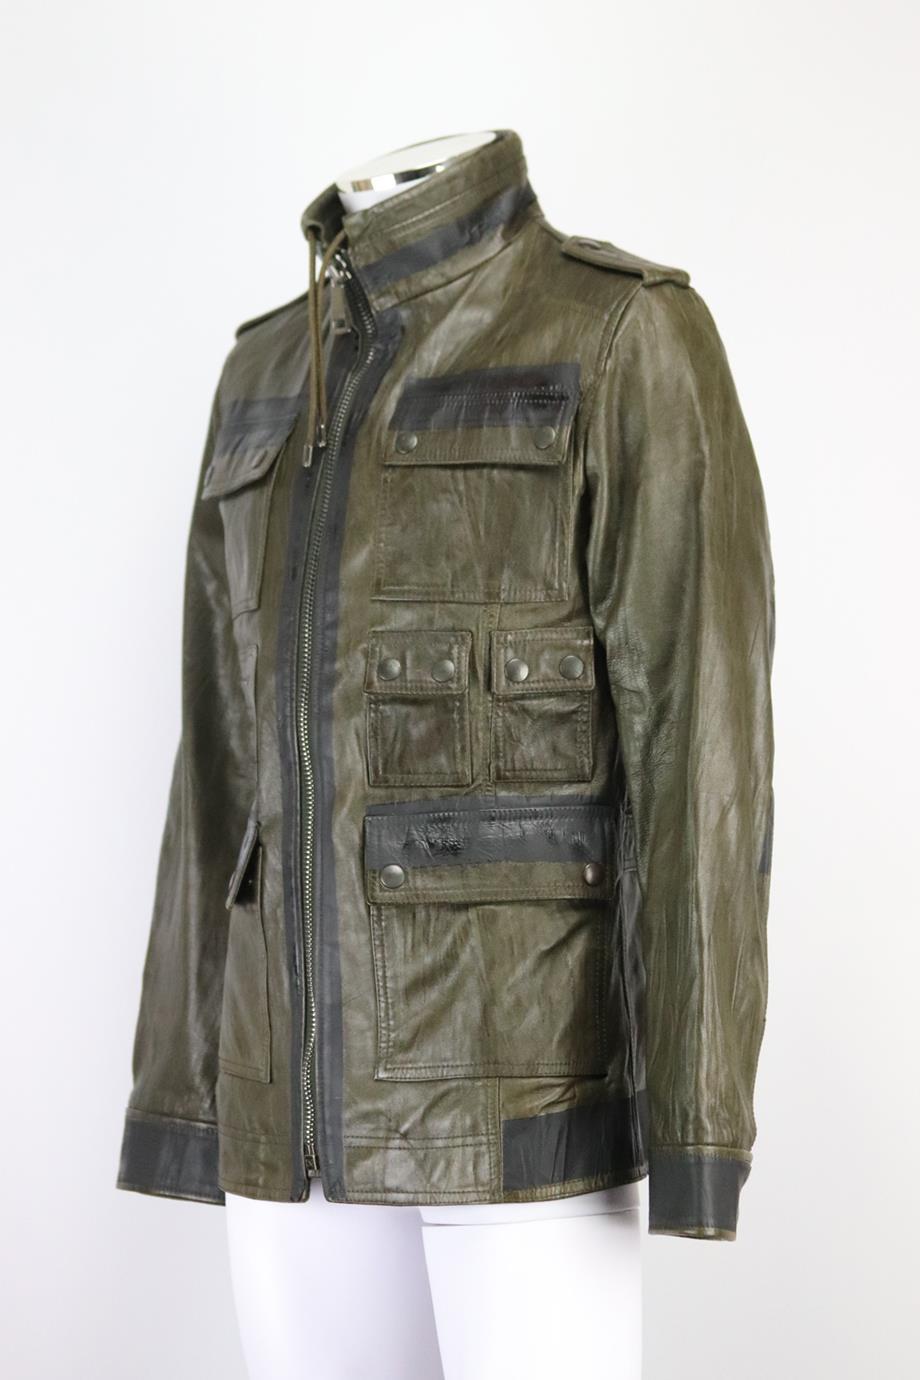 Dolce & Gabbana men’s leather jacket. This jacket is made from green leather with black pvc details and finished with multiple pockets for a utility feel. Green and black. Zip fastening at front. 85% Sheepskin, 15% pvc; lining: 100% rayon. Size: IT